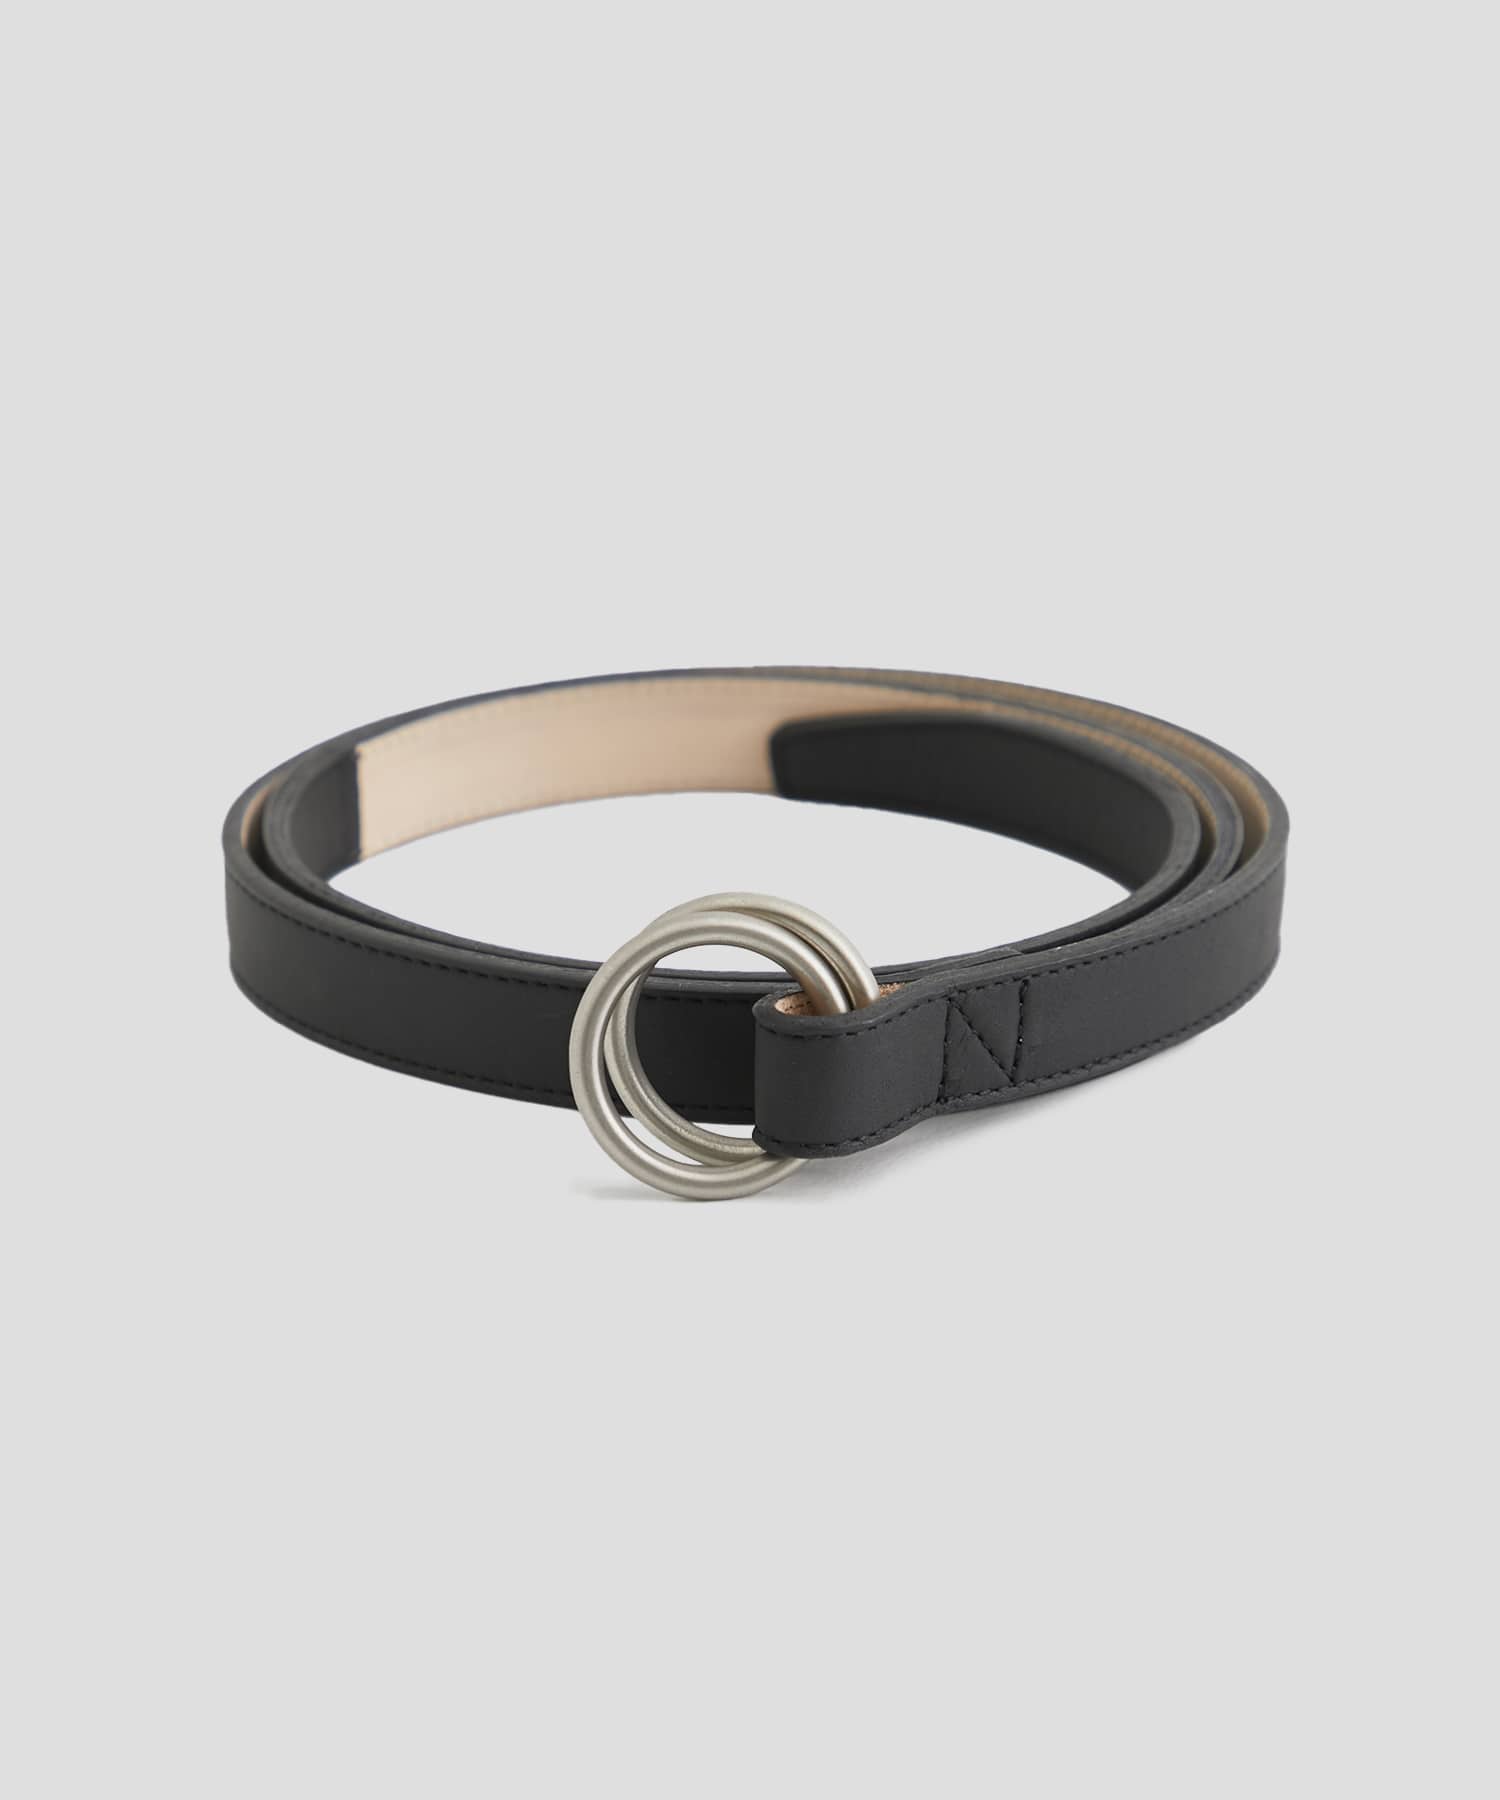 DWELLER RING BELTCOW LEATHER BY ECCO